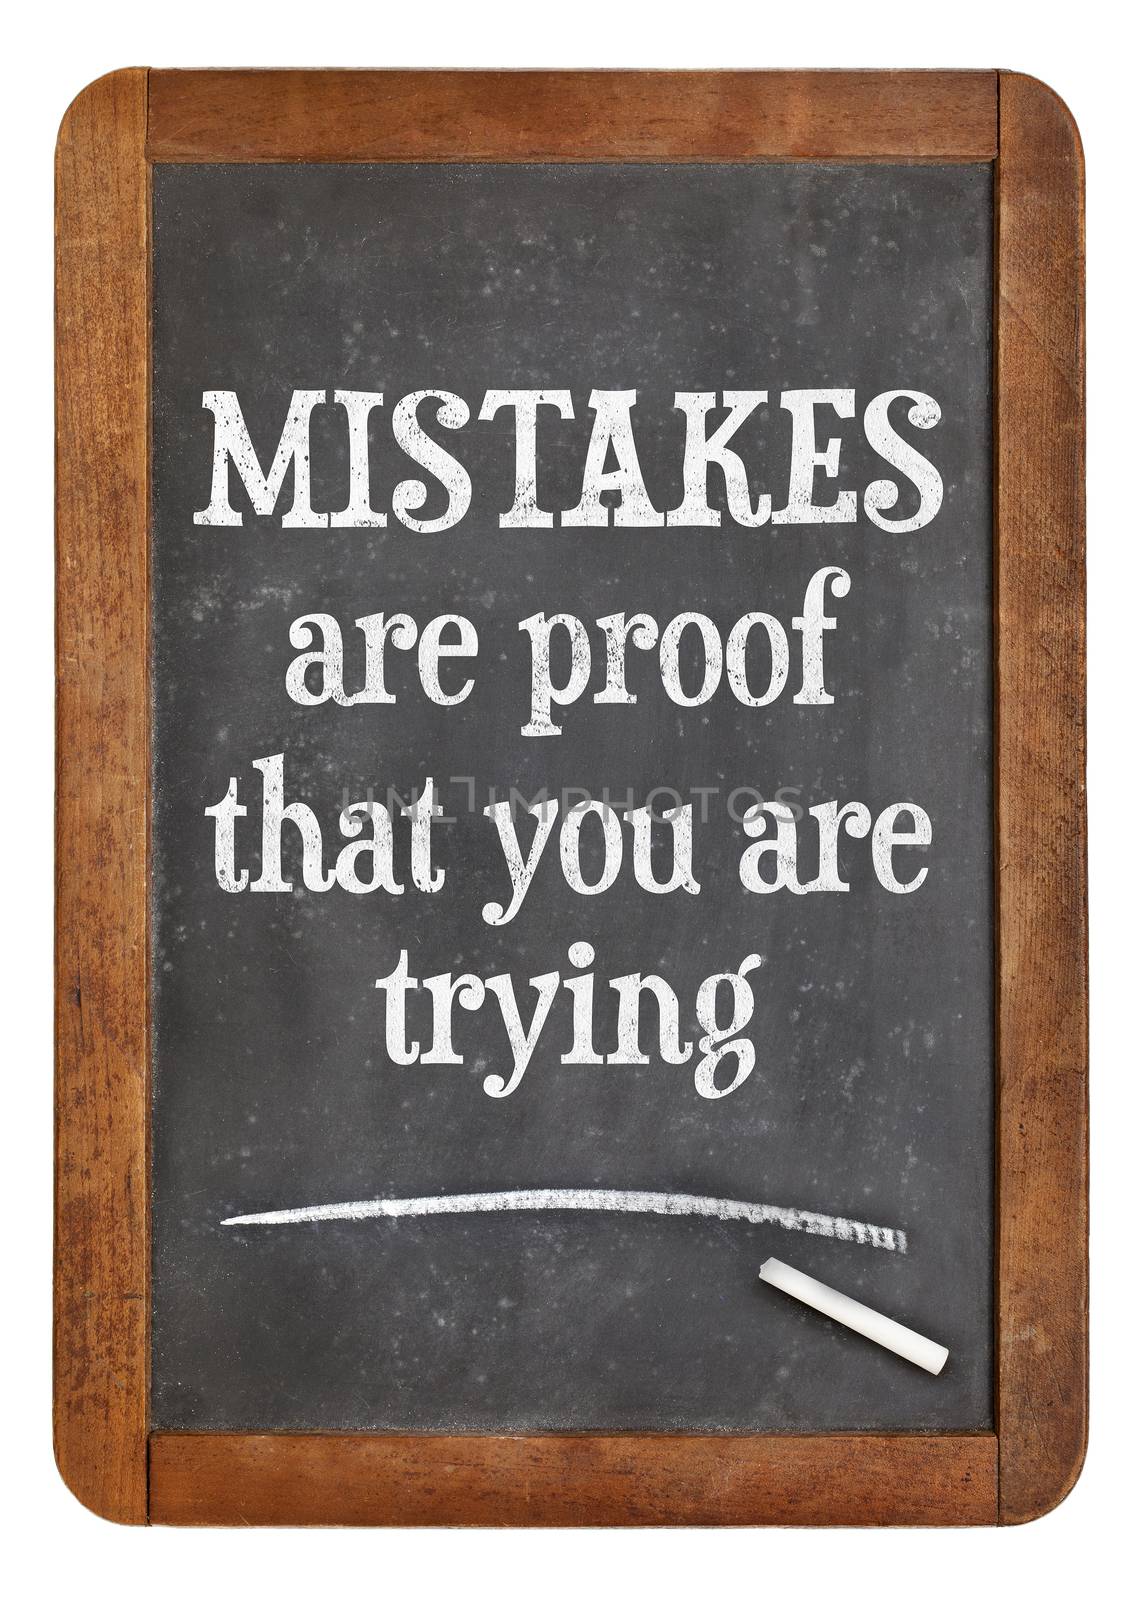 Mistakes are proof that you are trying - motivational text on a vintage slate blackboard